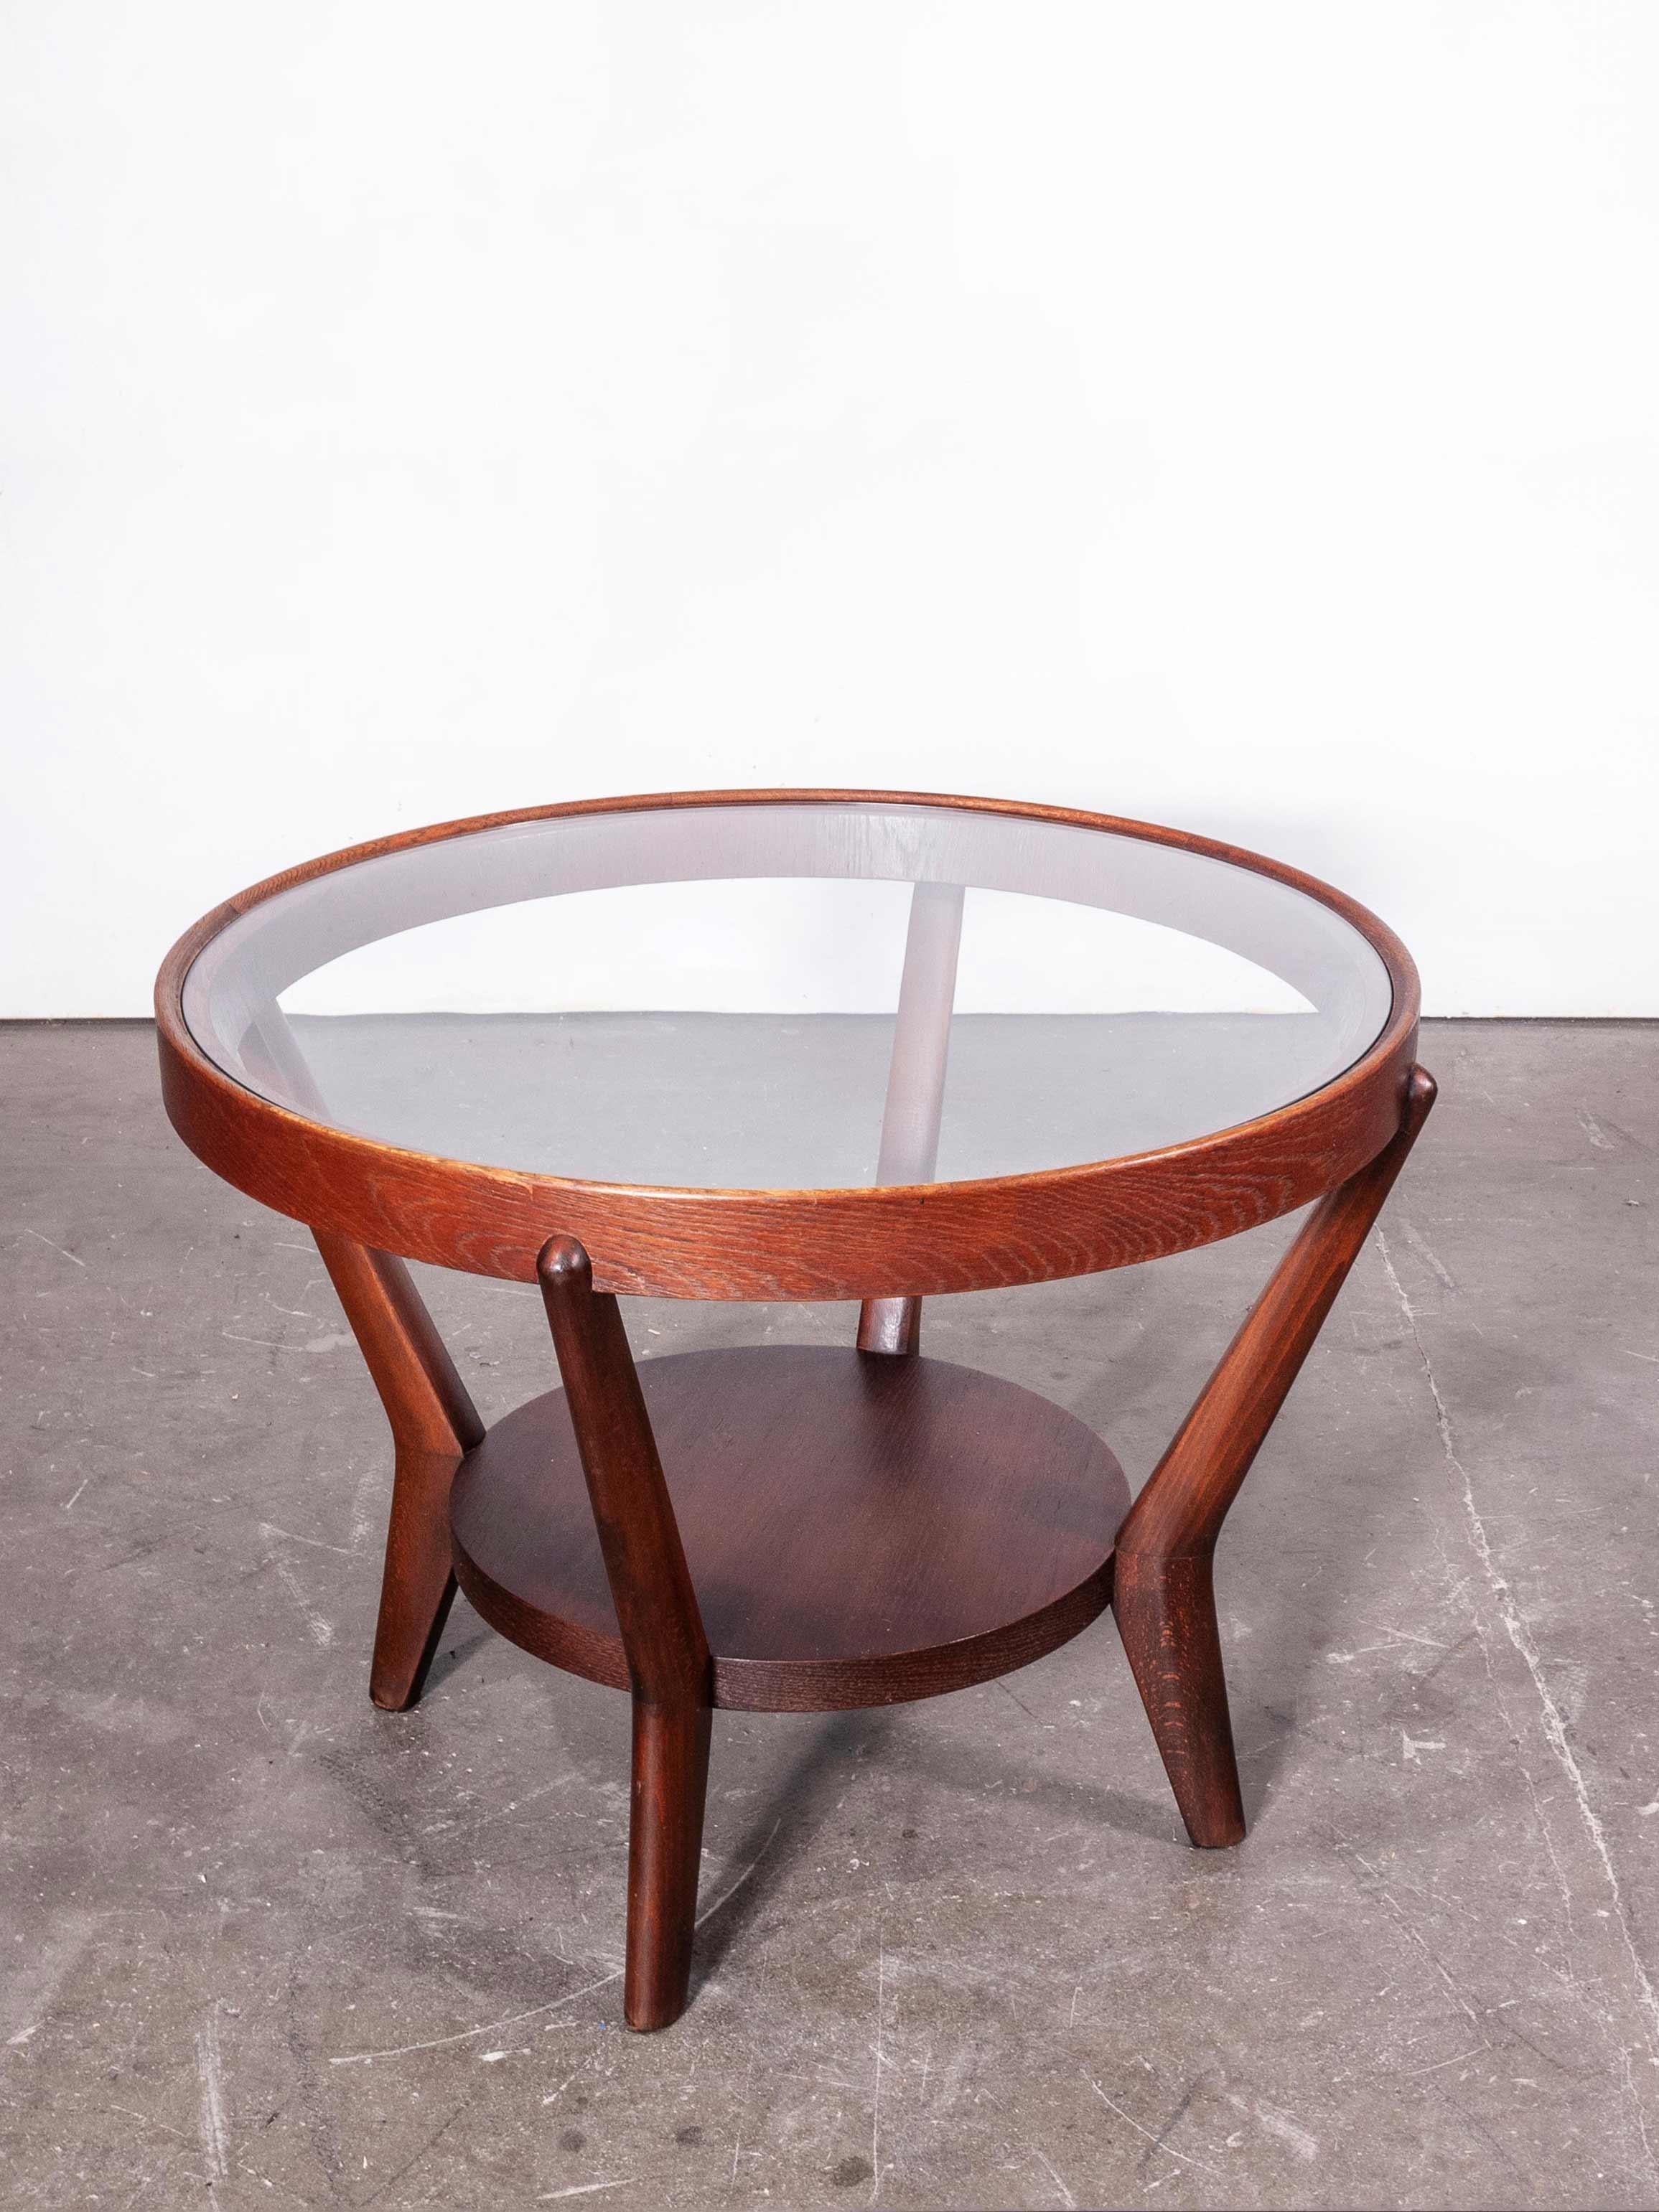 Oak 1950s Round Occasional Table by Kozelka and Kropacek for Interieur Praha, Dark